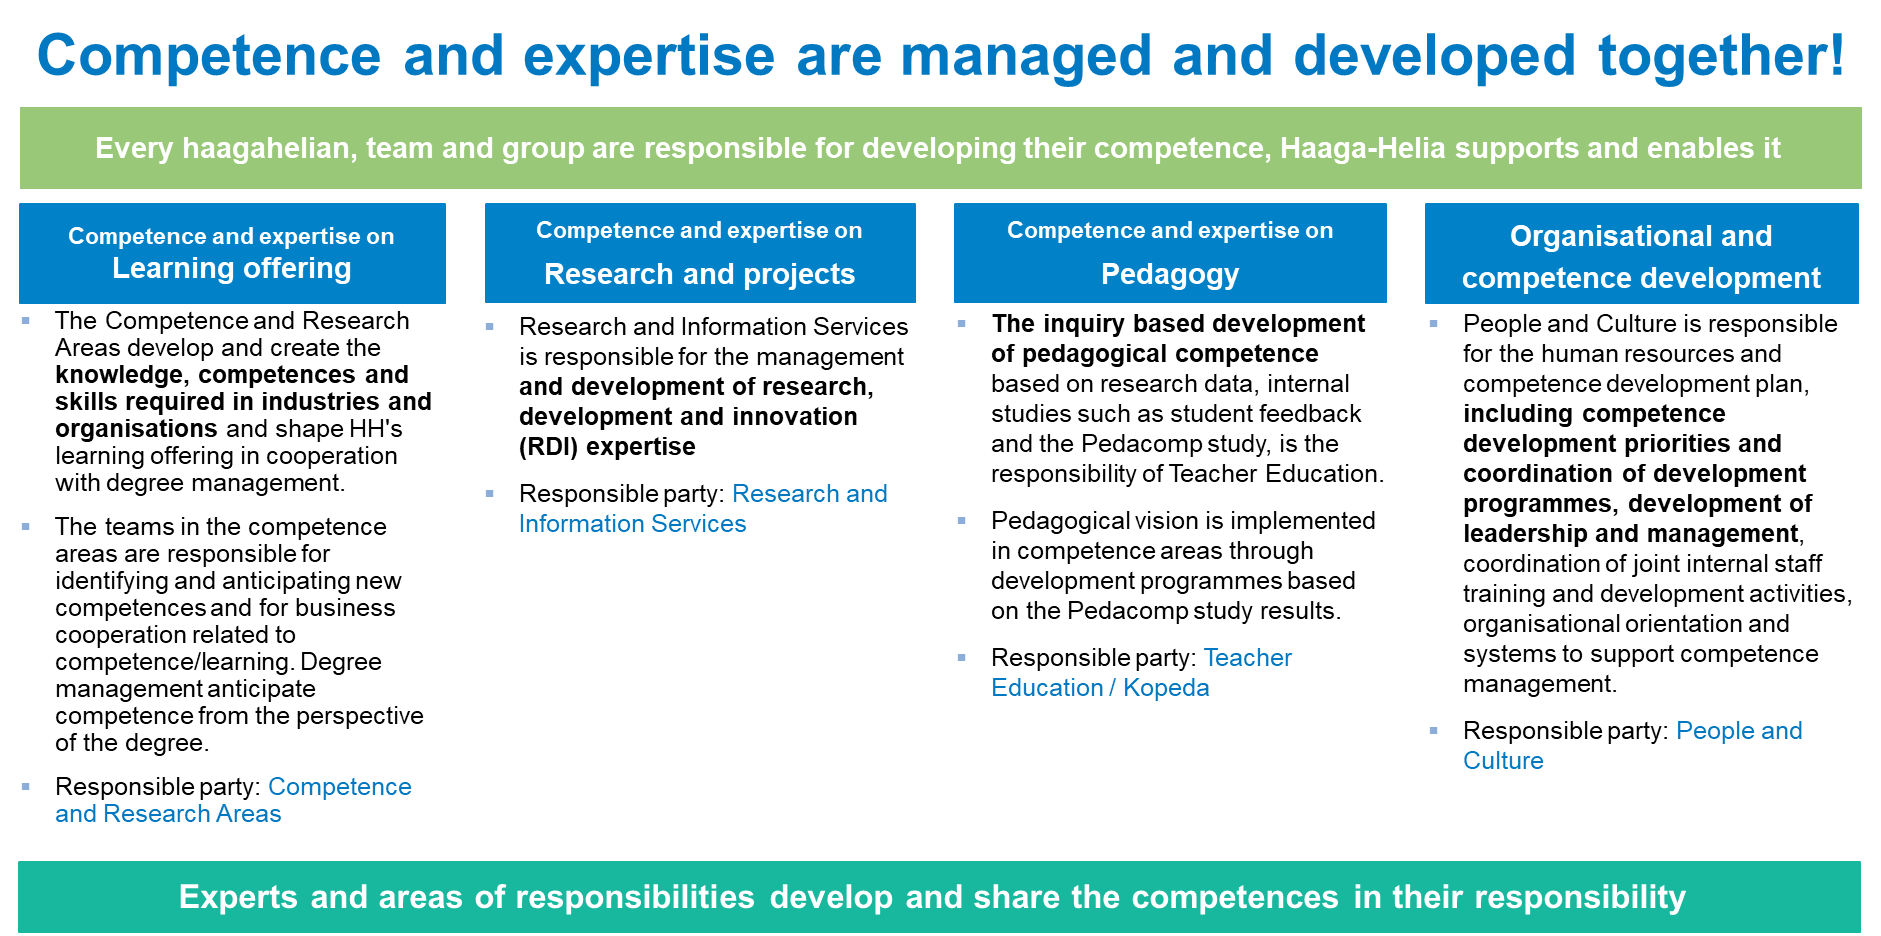 Picture 21. Competence development areas